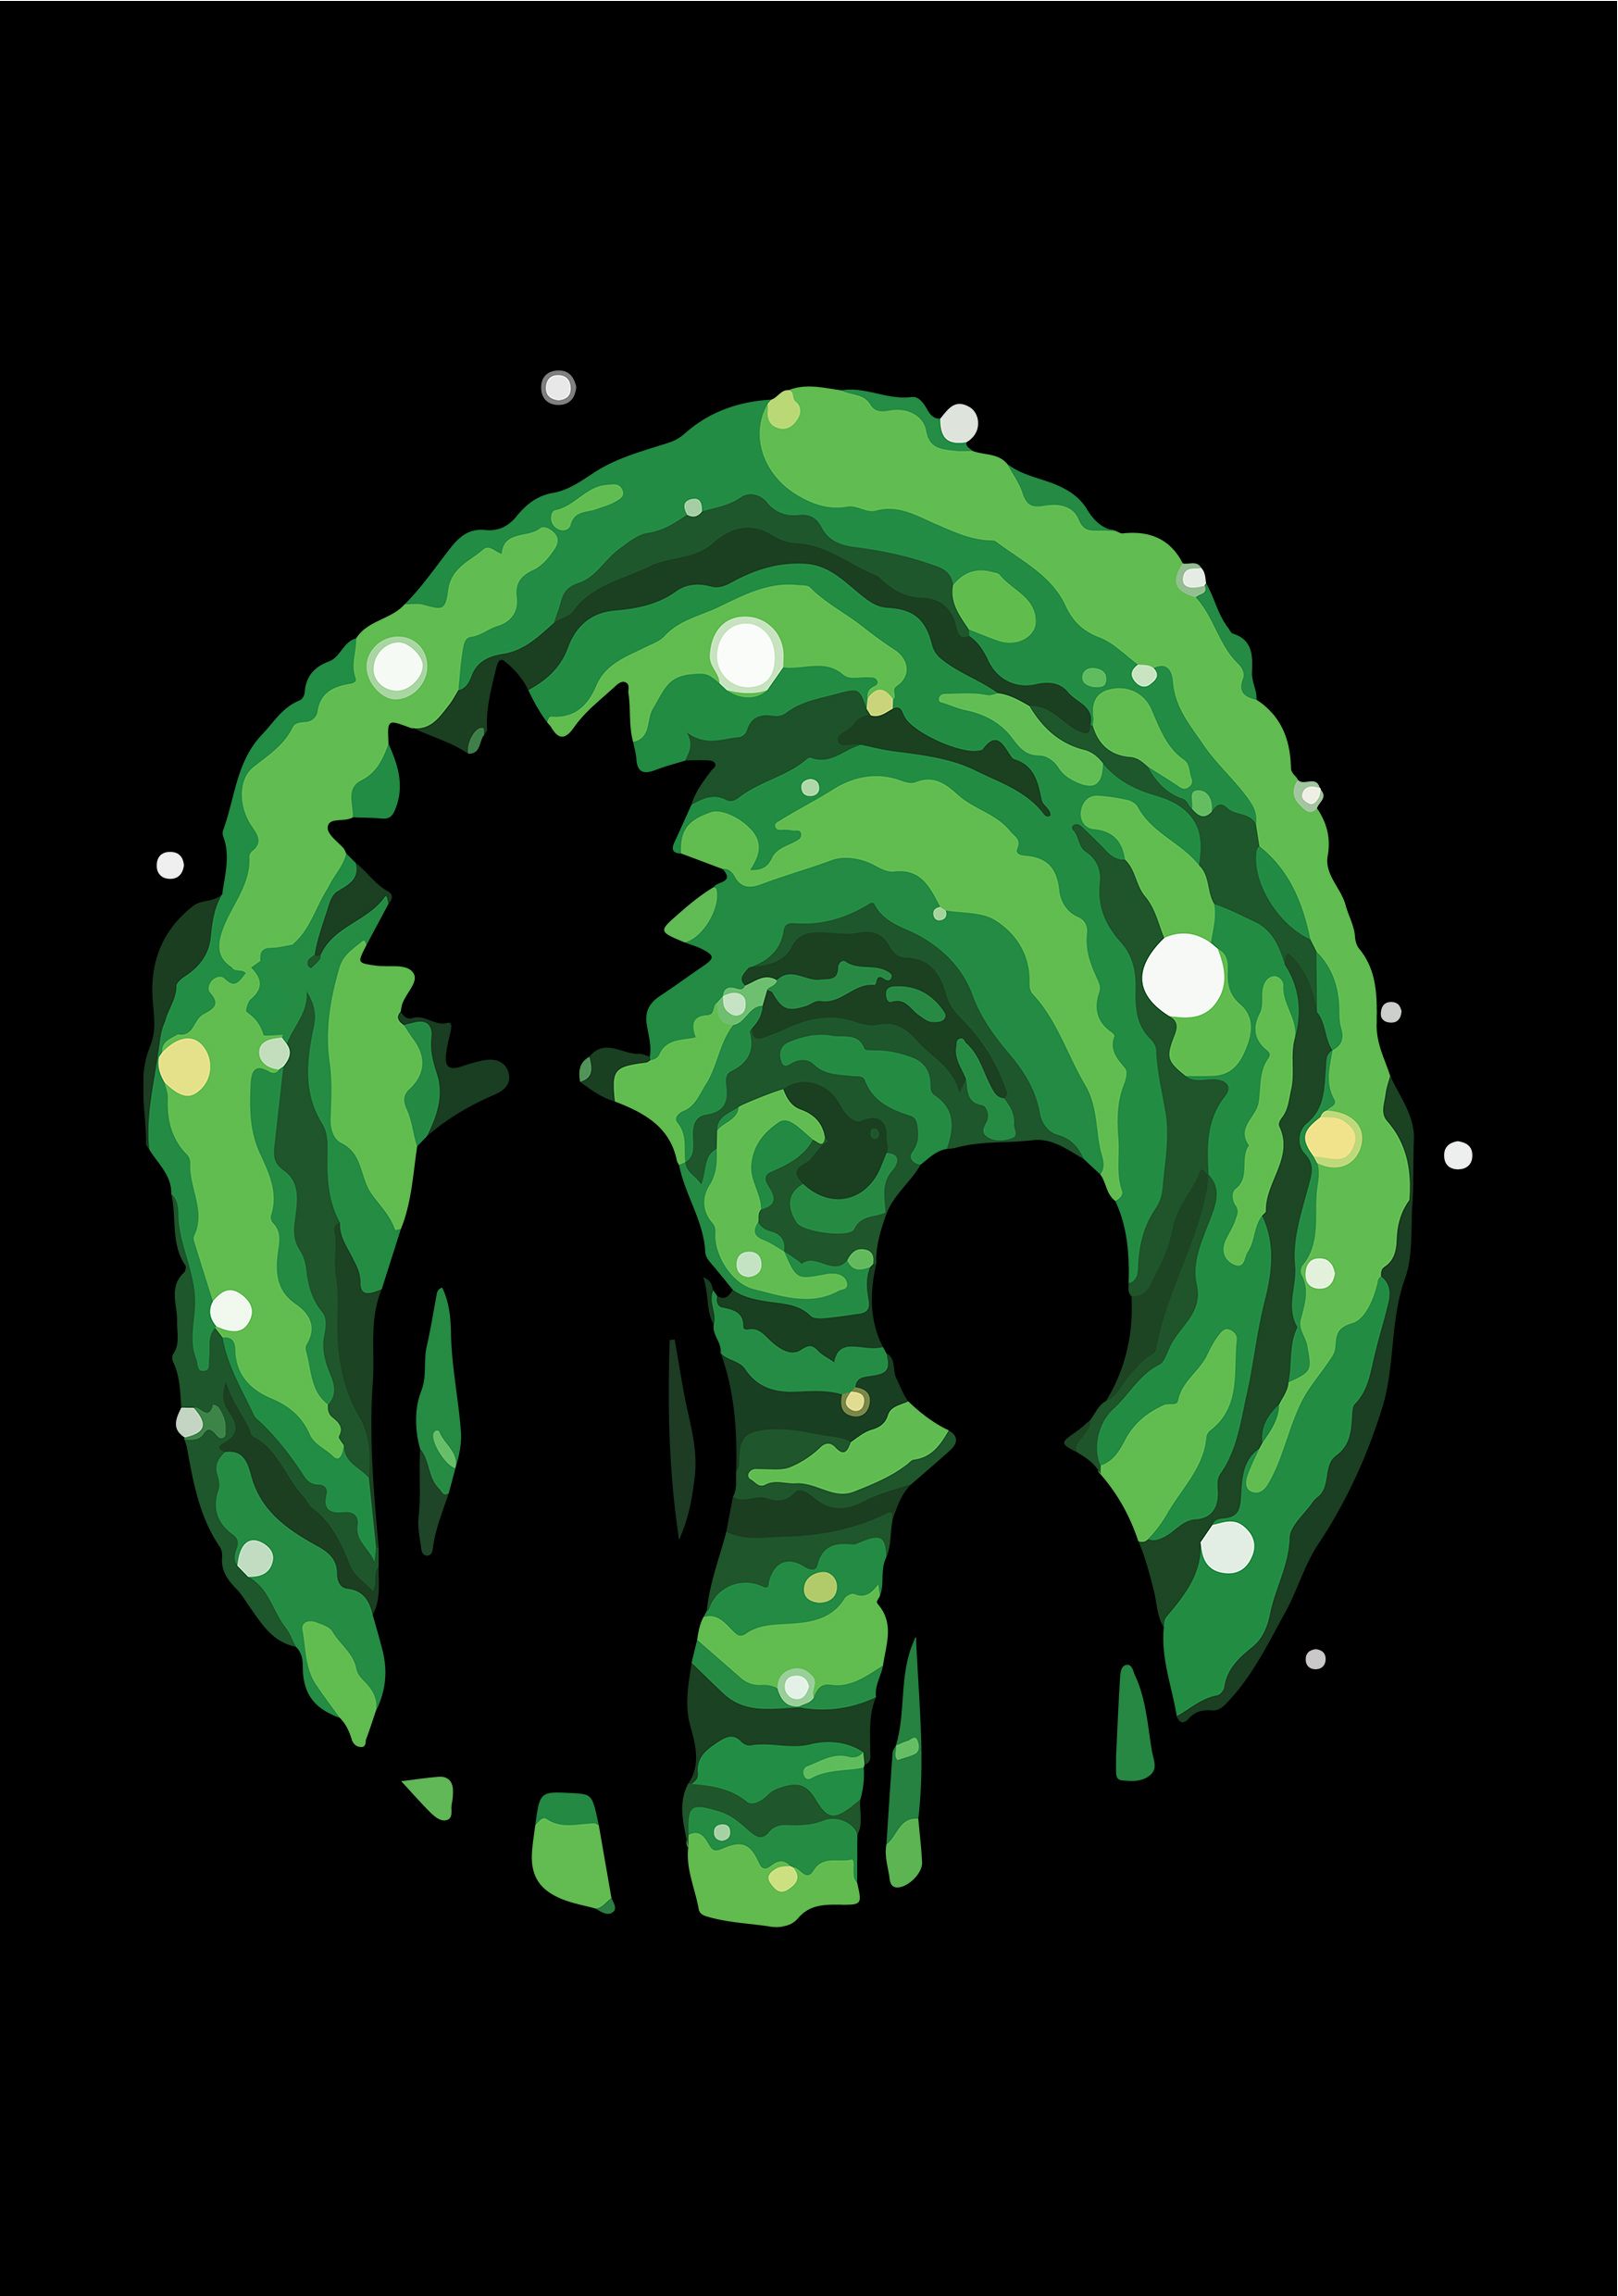 Rick And Morty Poster. Rick and morty drawing, Rick and morty image, Rick and morty poster